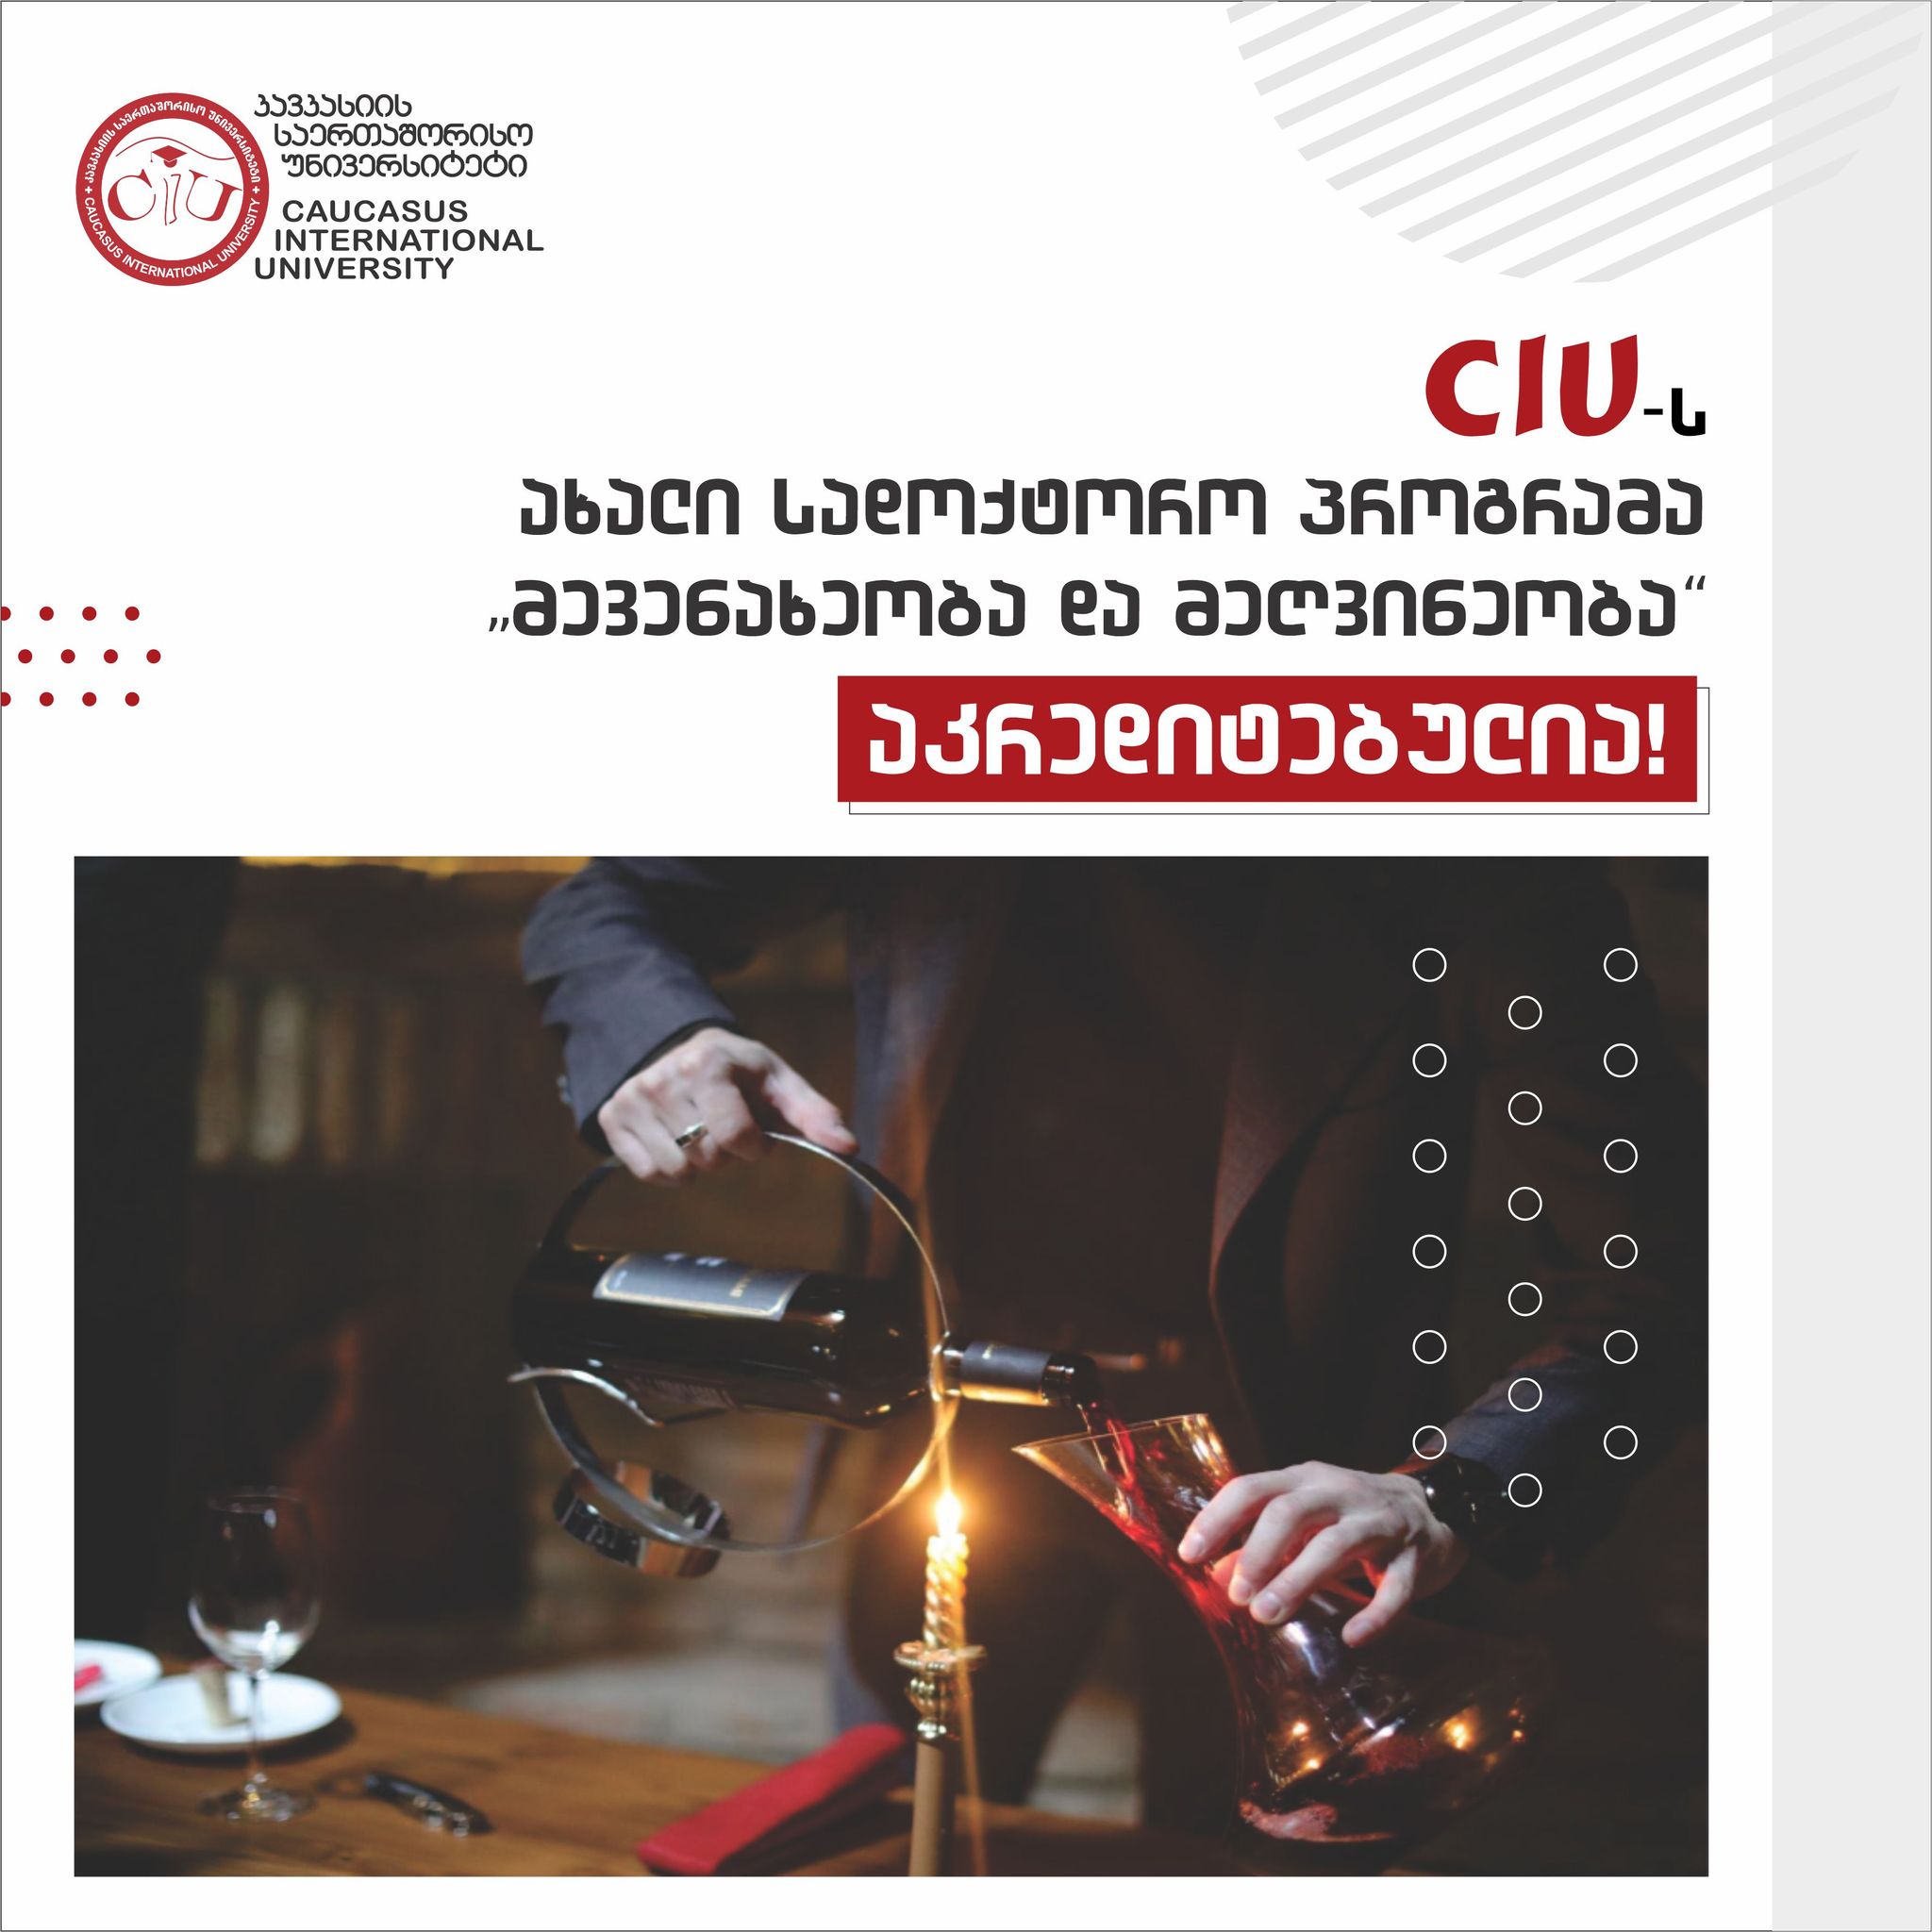 New Doctoral Program - Viticulture and Winemaking Offered by CIU Is Accredited